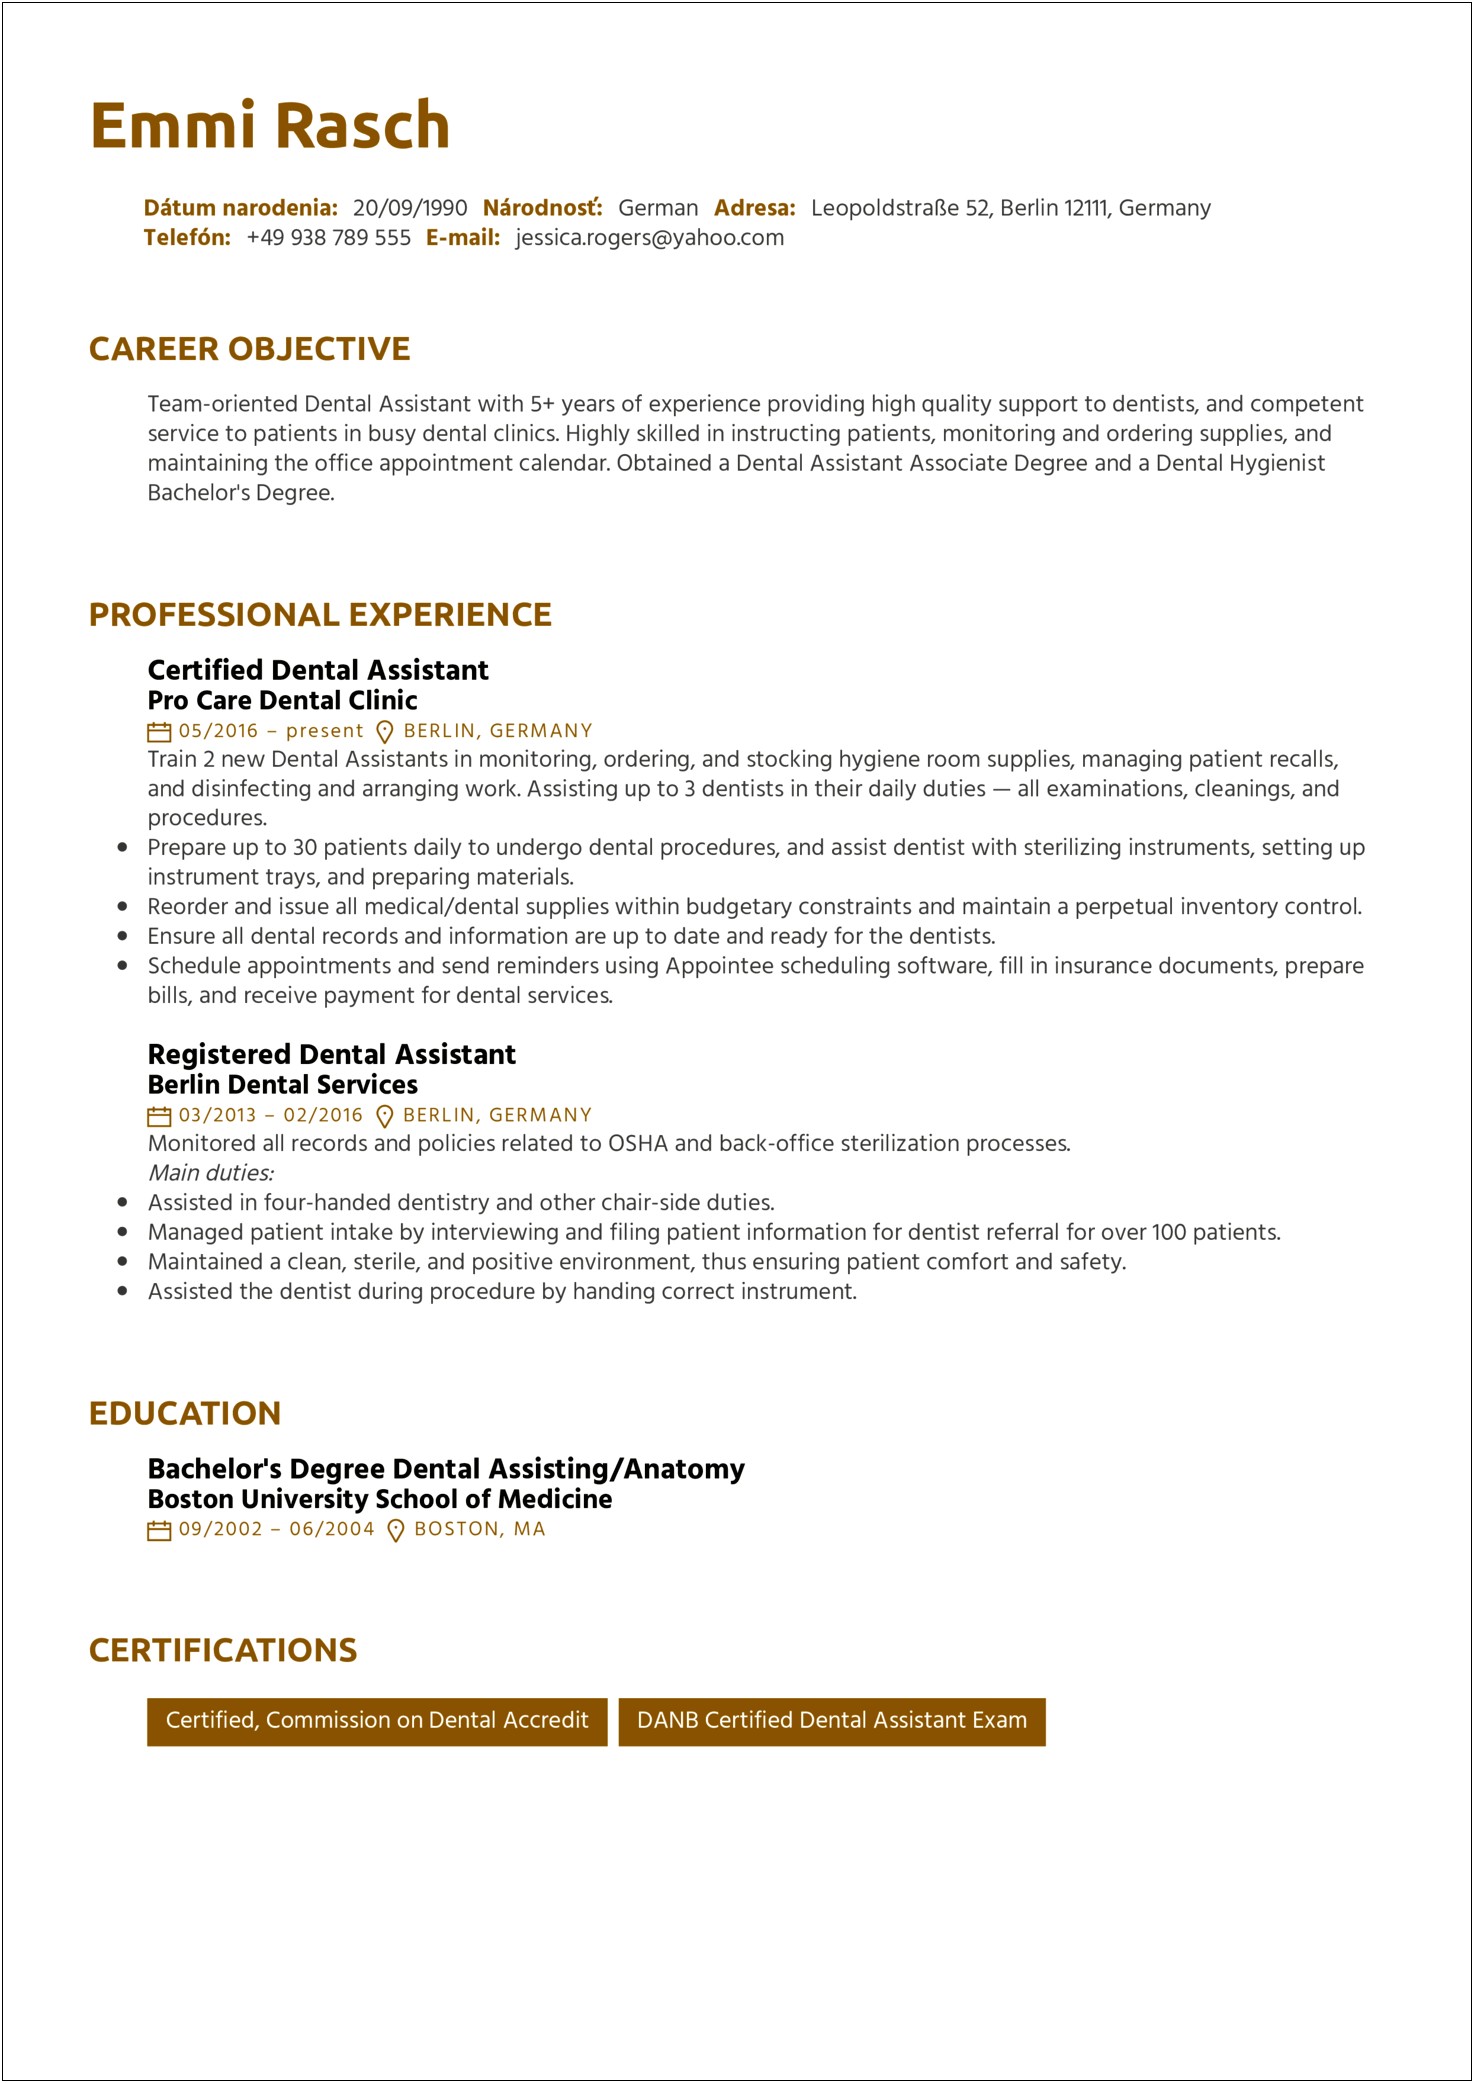 Resume Samples For Client Intake Assistant